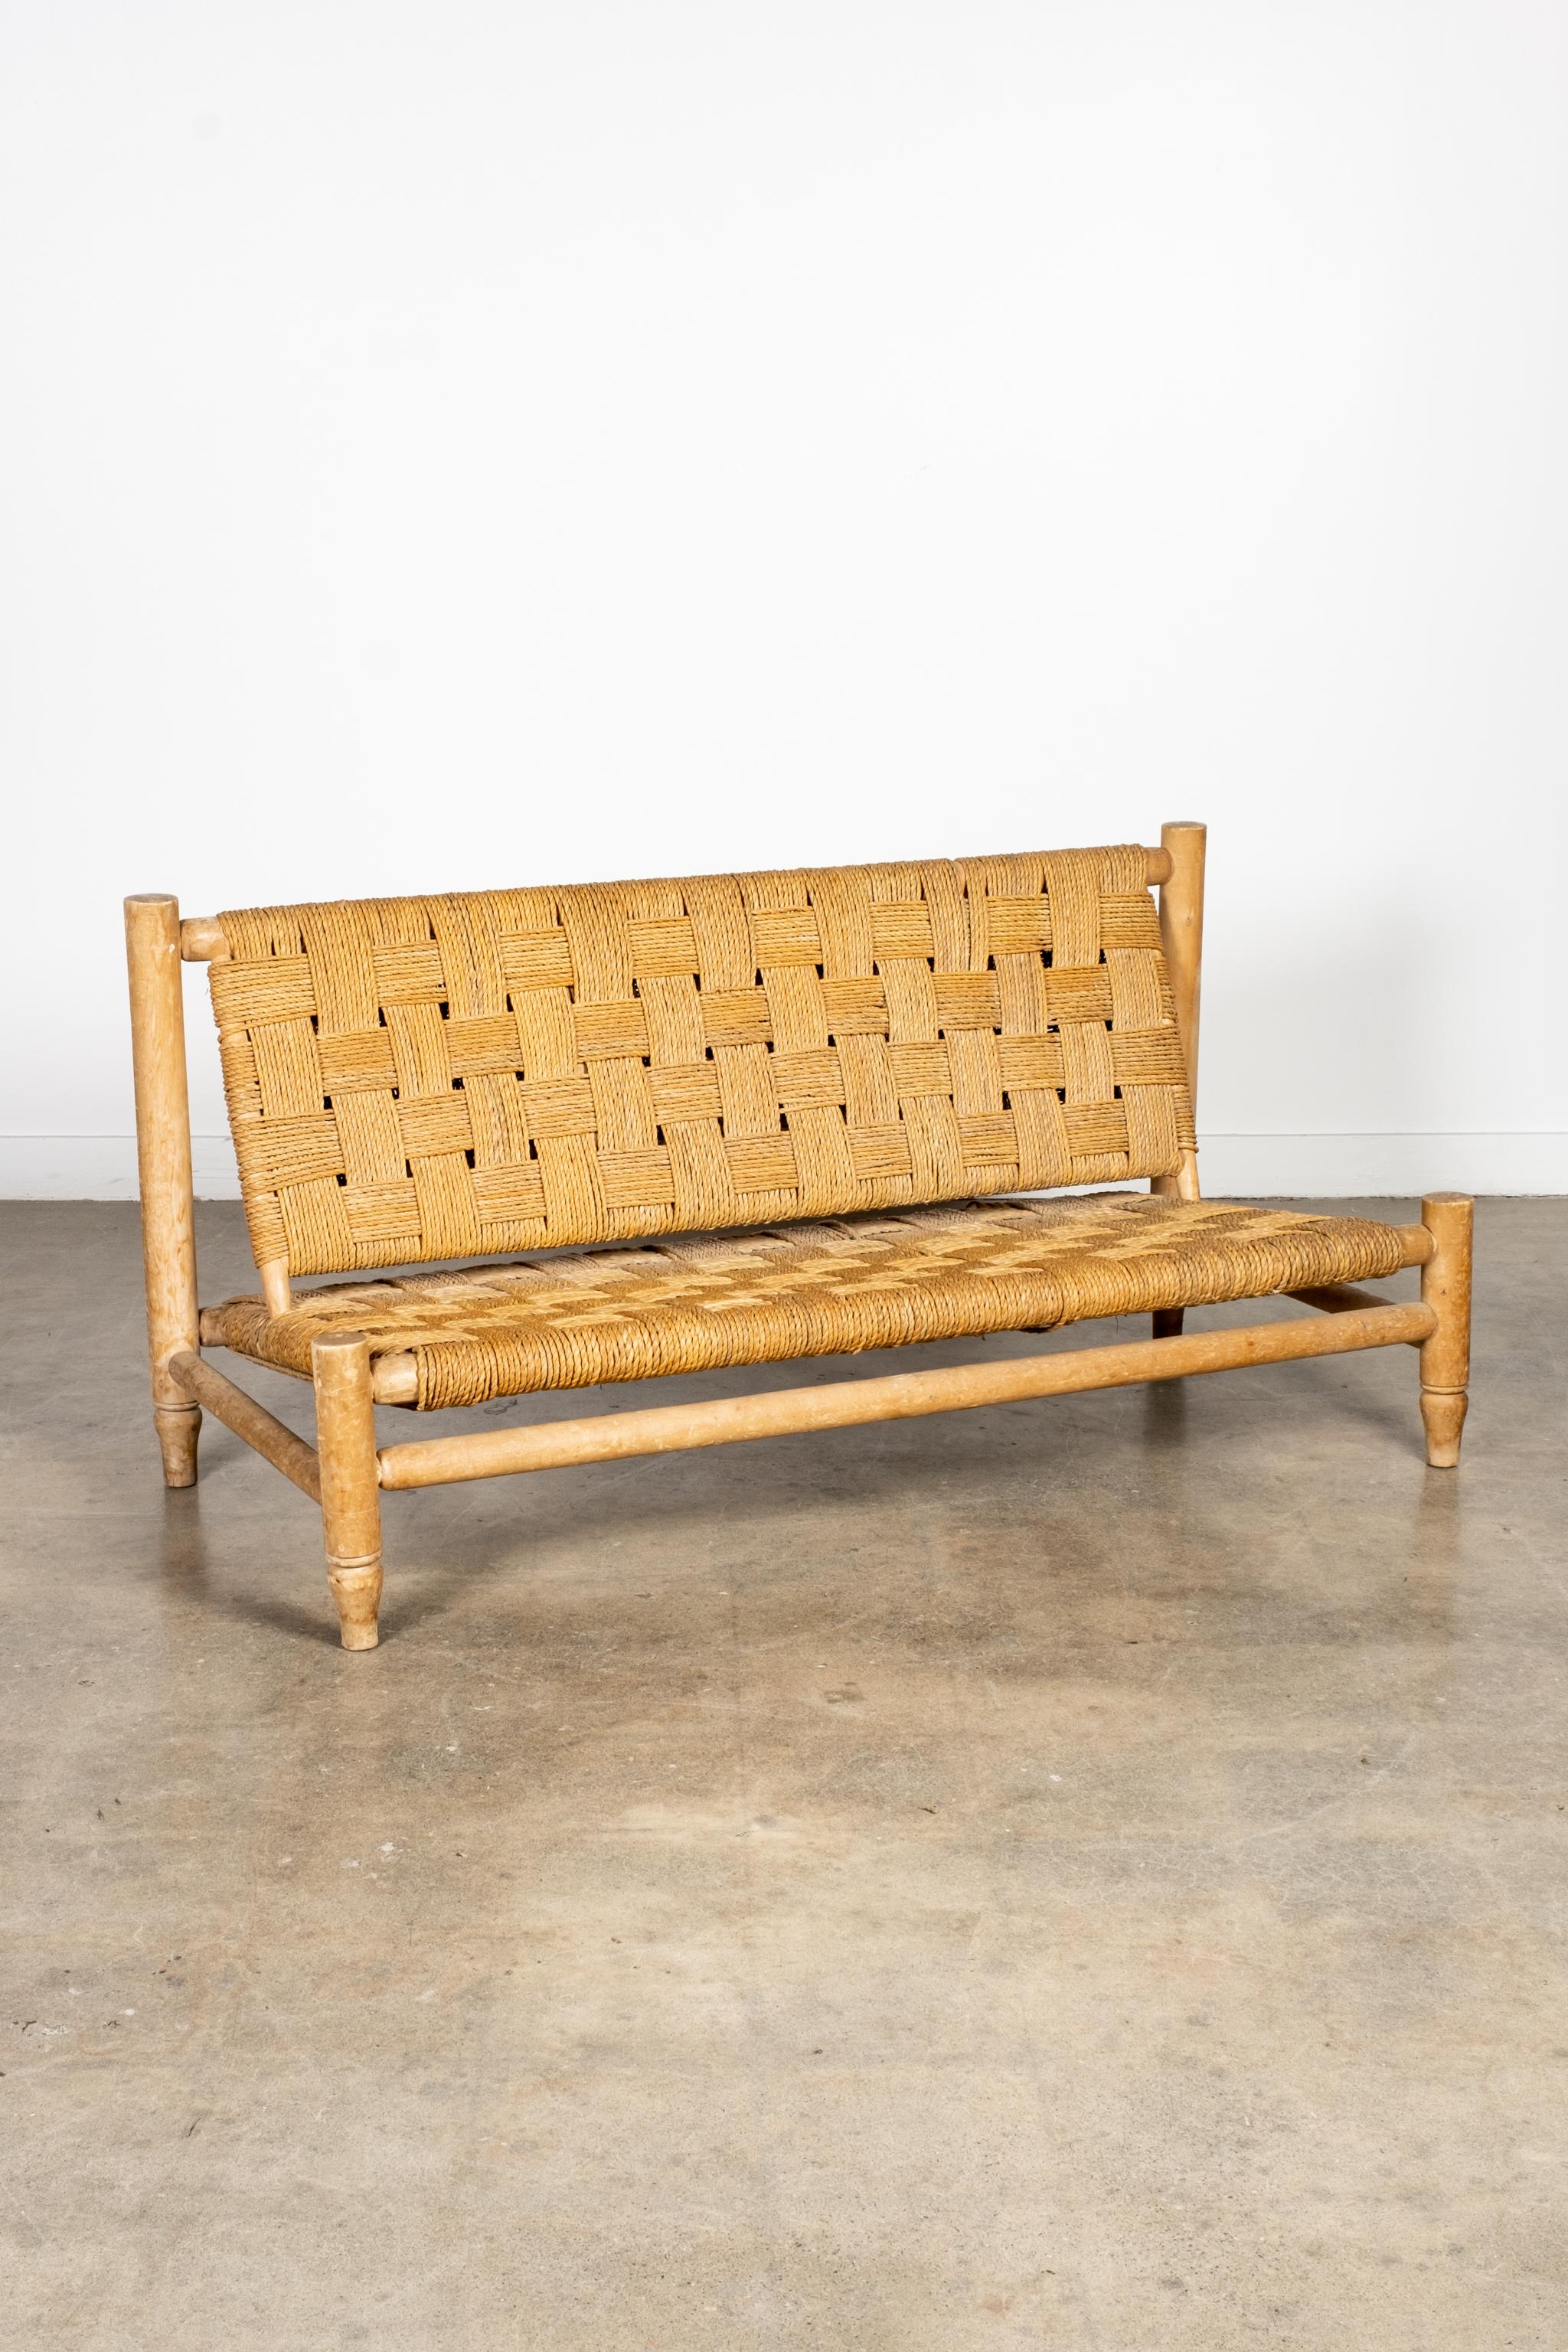 Beautiful 1950s 2-seater loveseat settee designed by French Modernist duo Adrian Audoux and Frida Minet. The primitive hand-turned beech frame clad in Original woven Abaca rope, references coastal living, while celebrating its humble materials - a